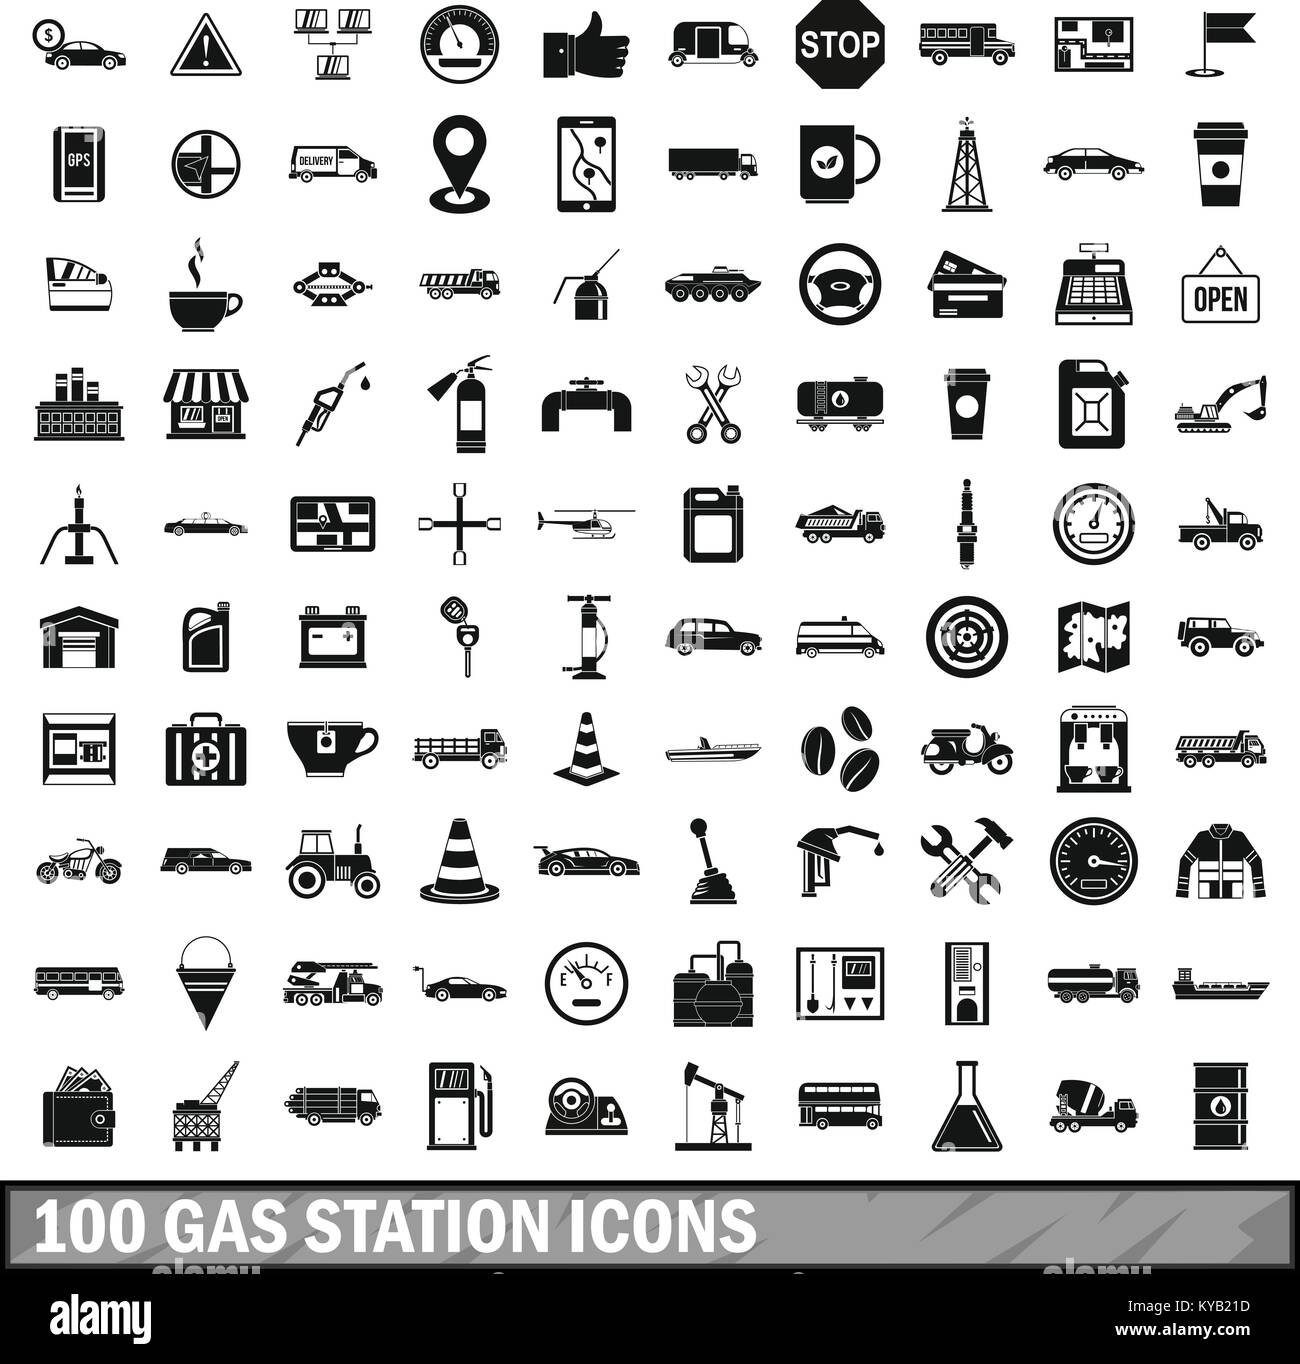 100 gas station icons set in simple style for any design vector illustration Stock Vector